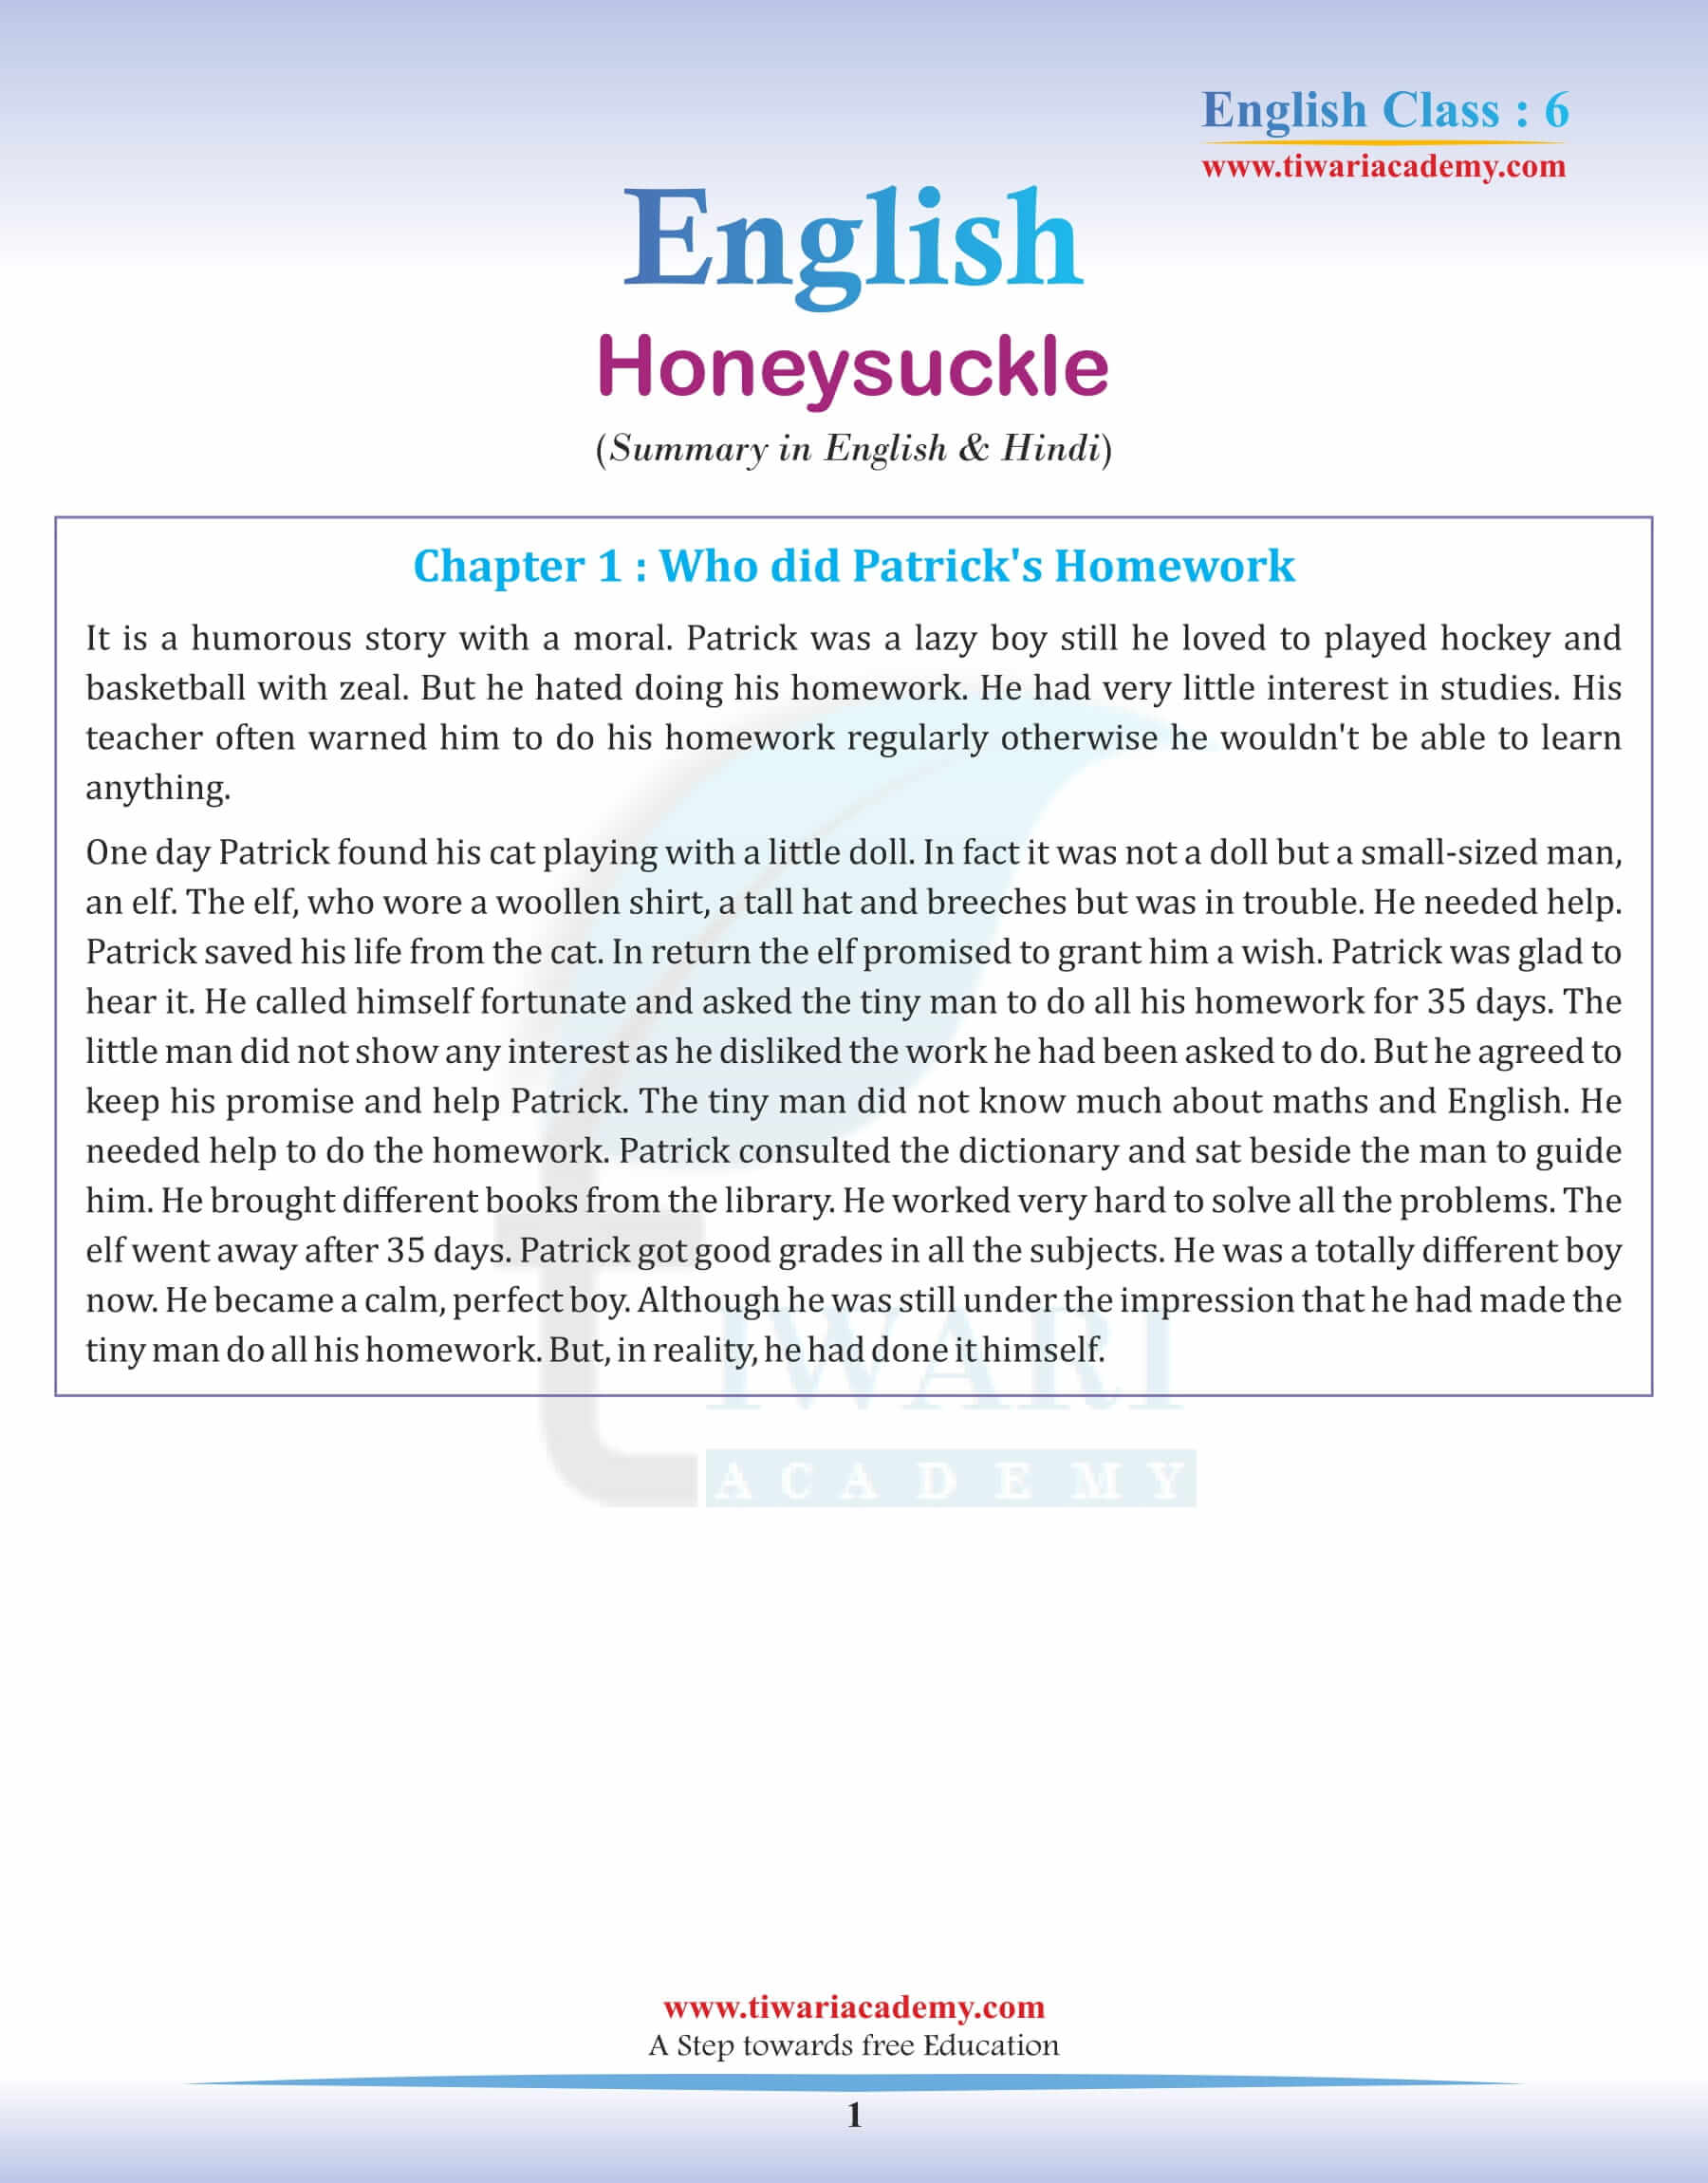 Class 6 English Chapter 1 Summary in English